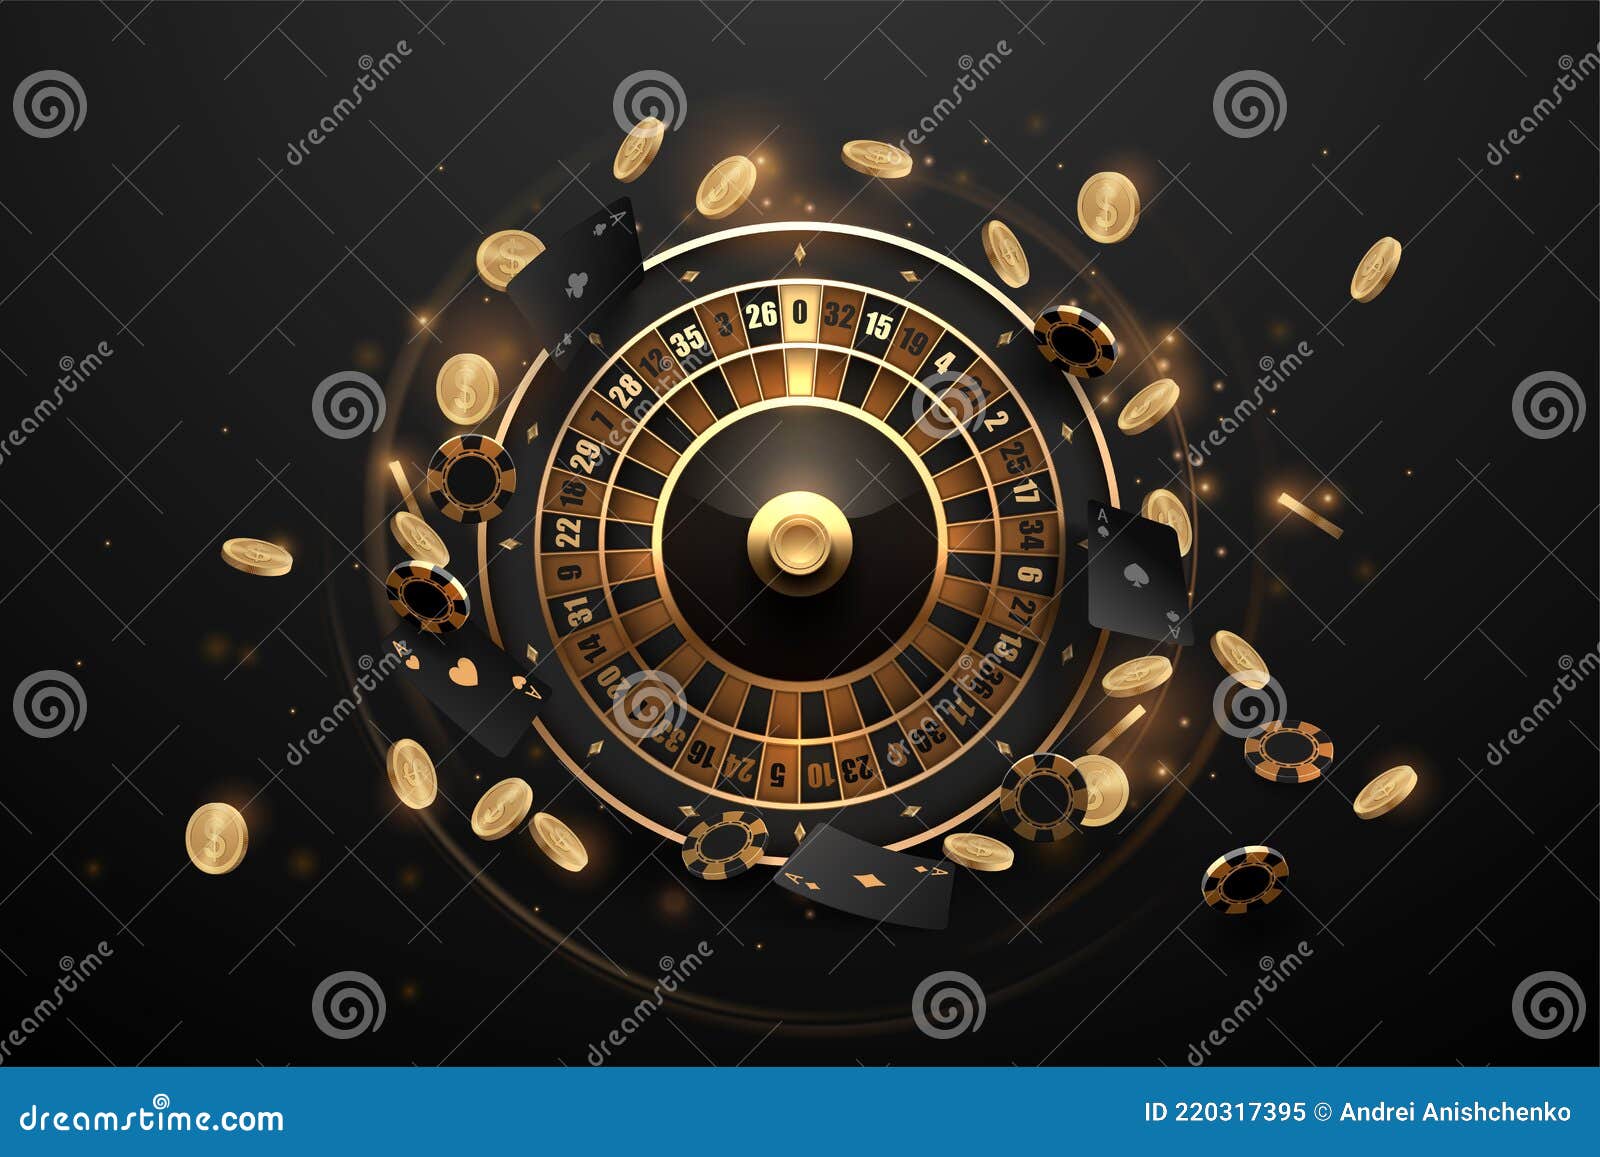 casino roulette in black and gold style with effects